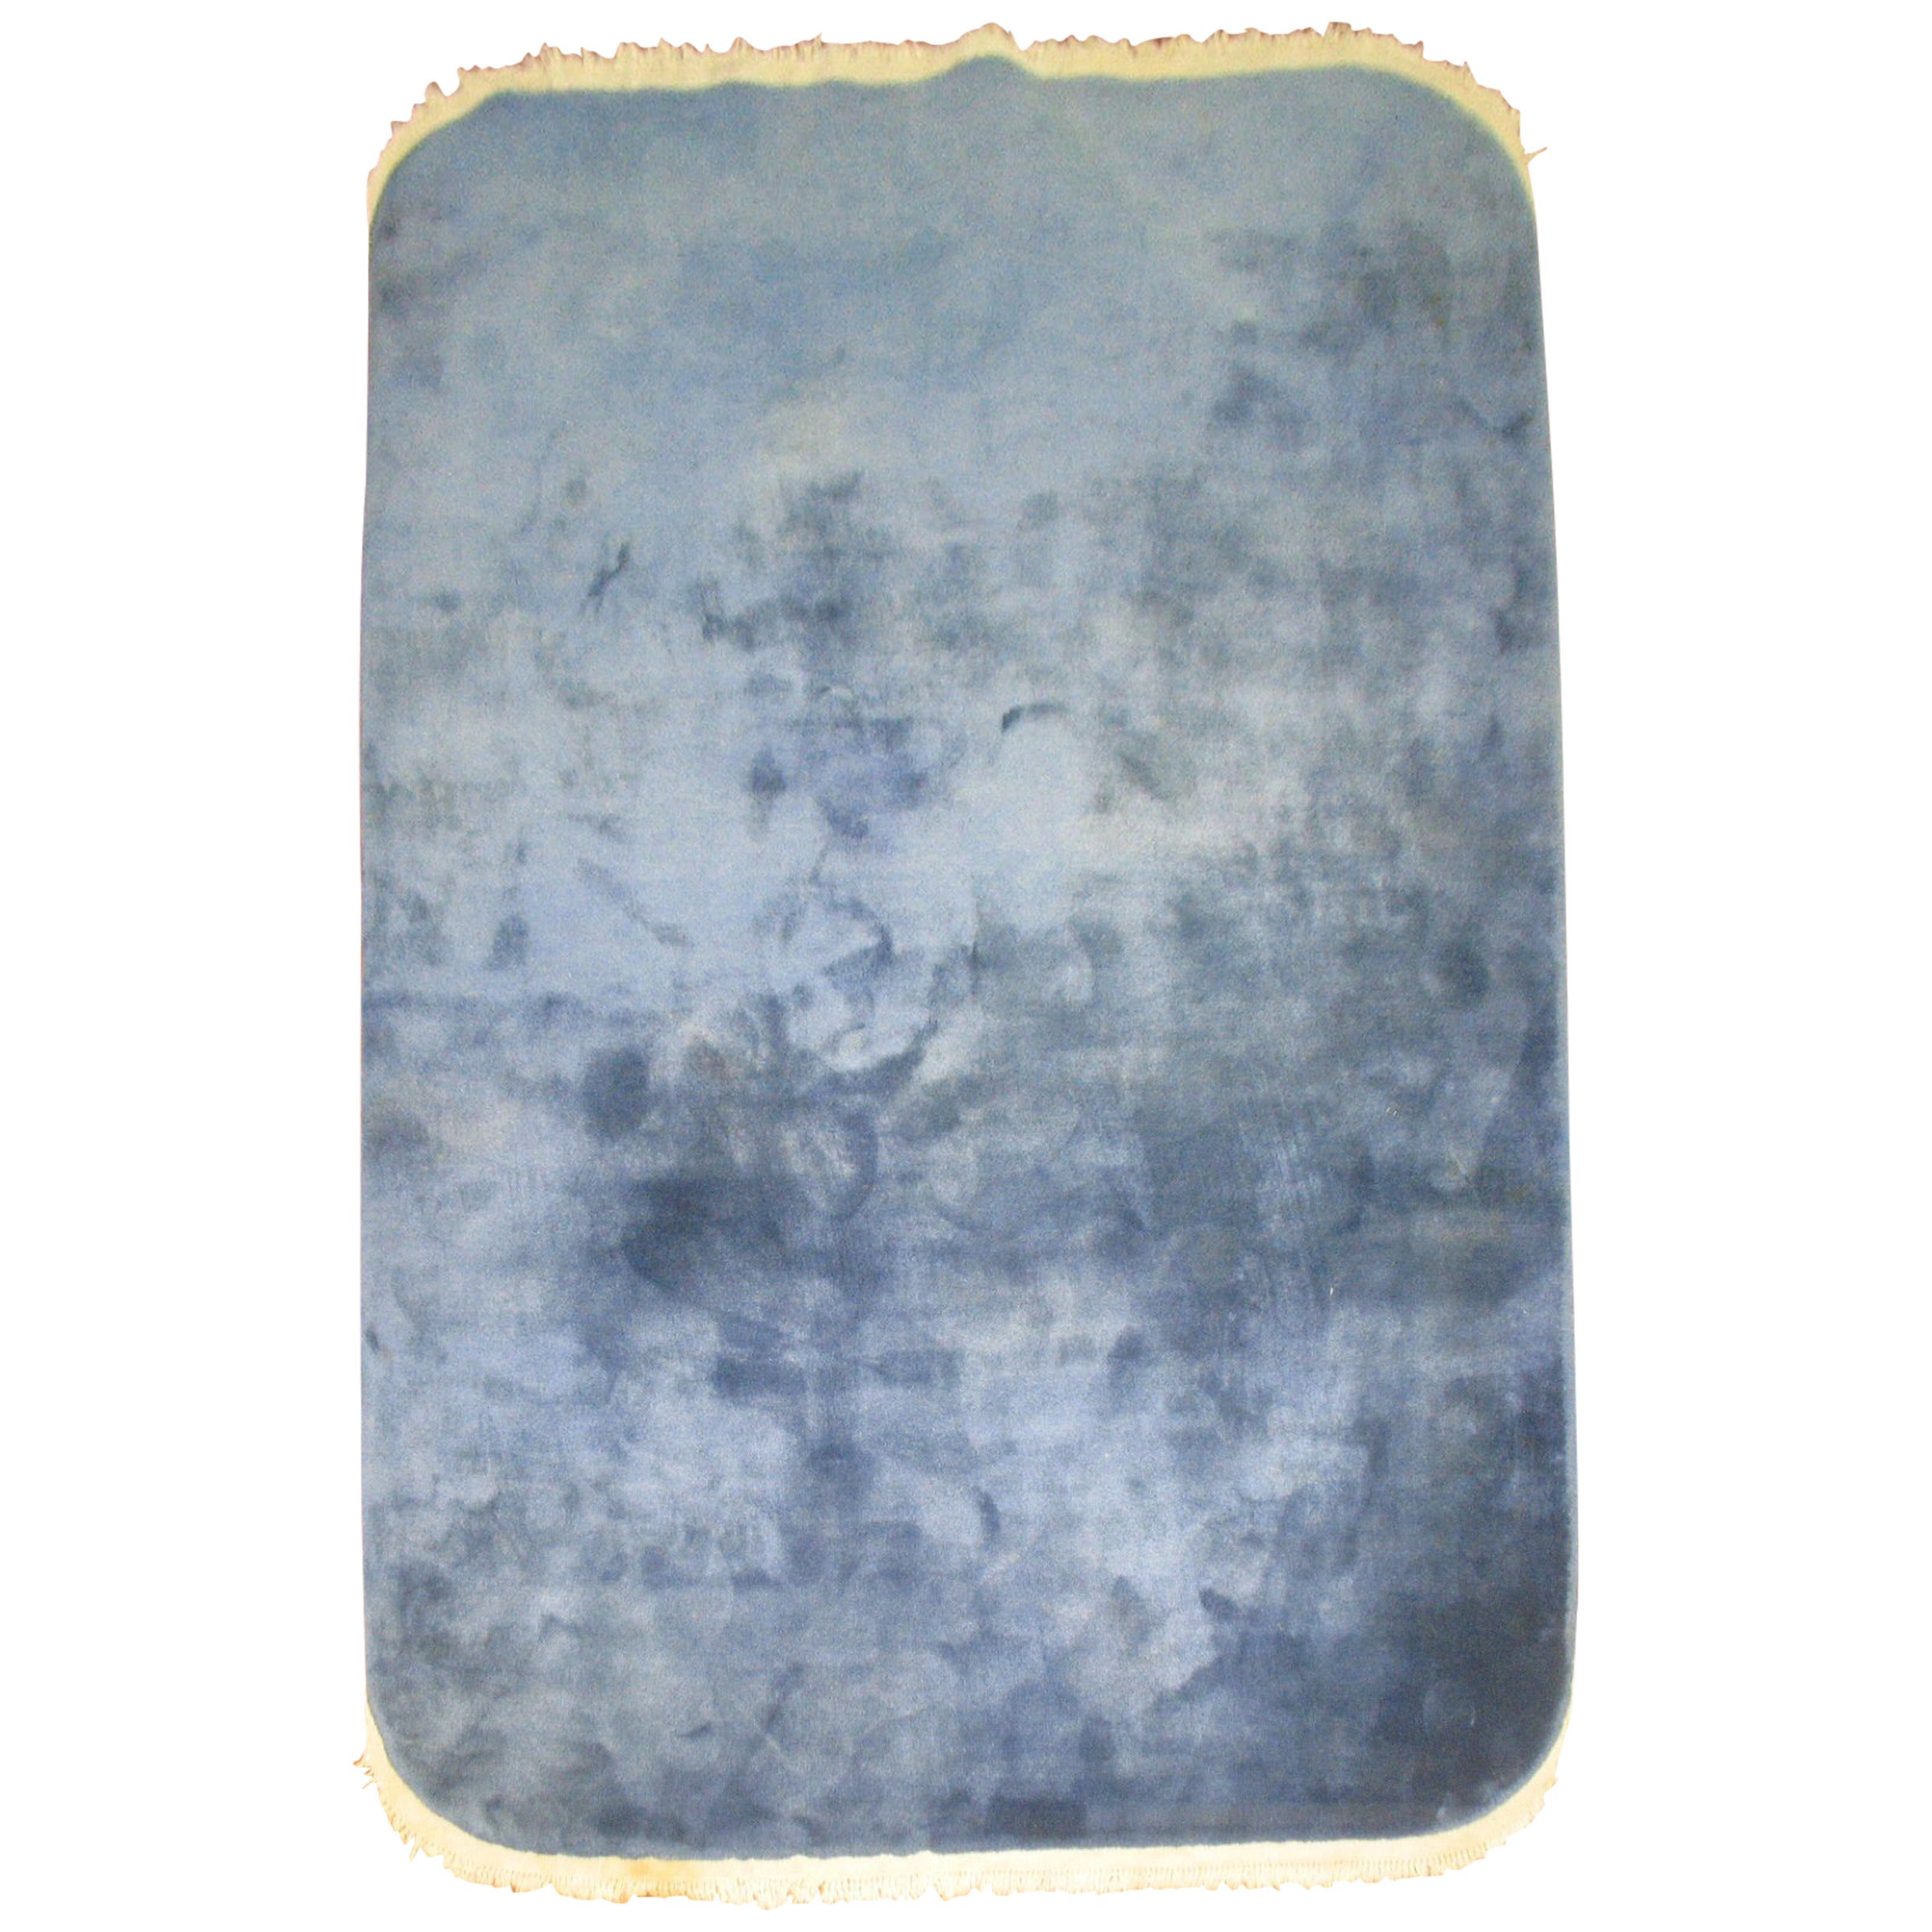 Blue Chinese Rug